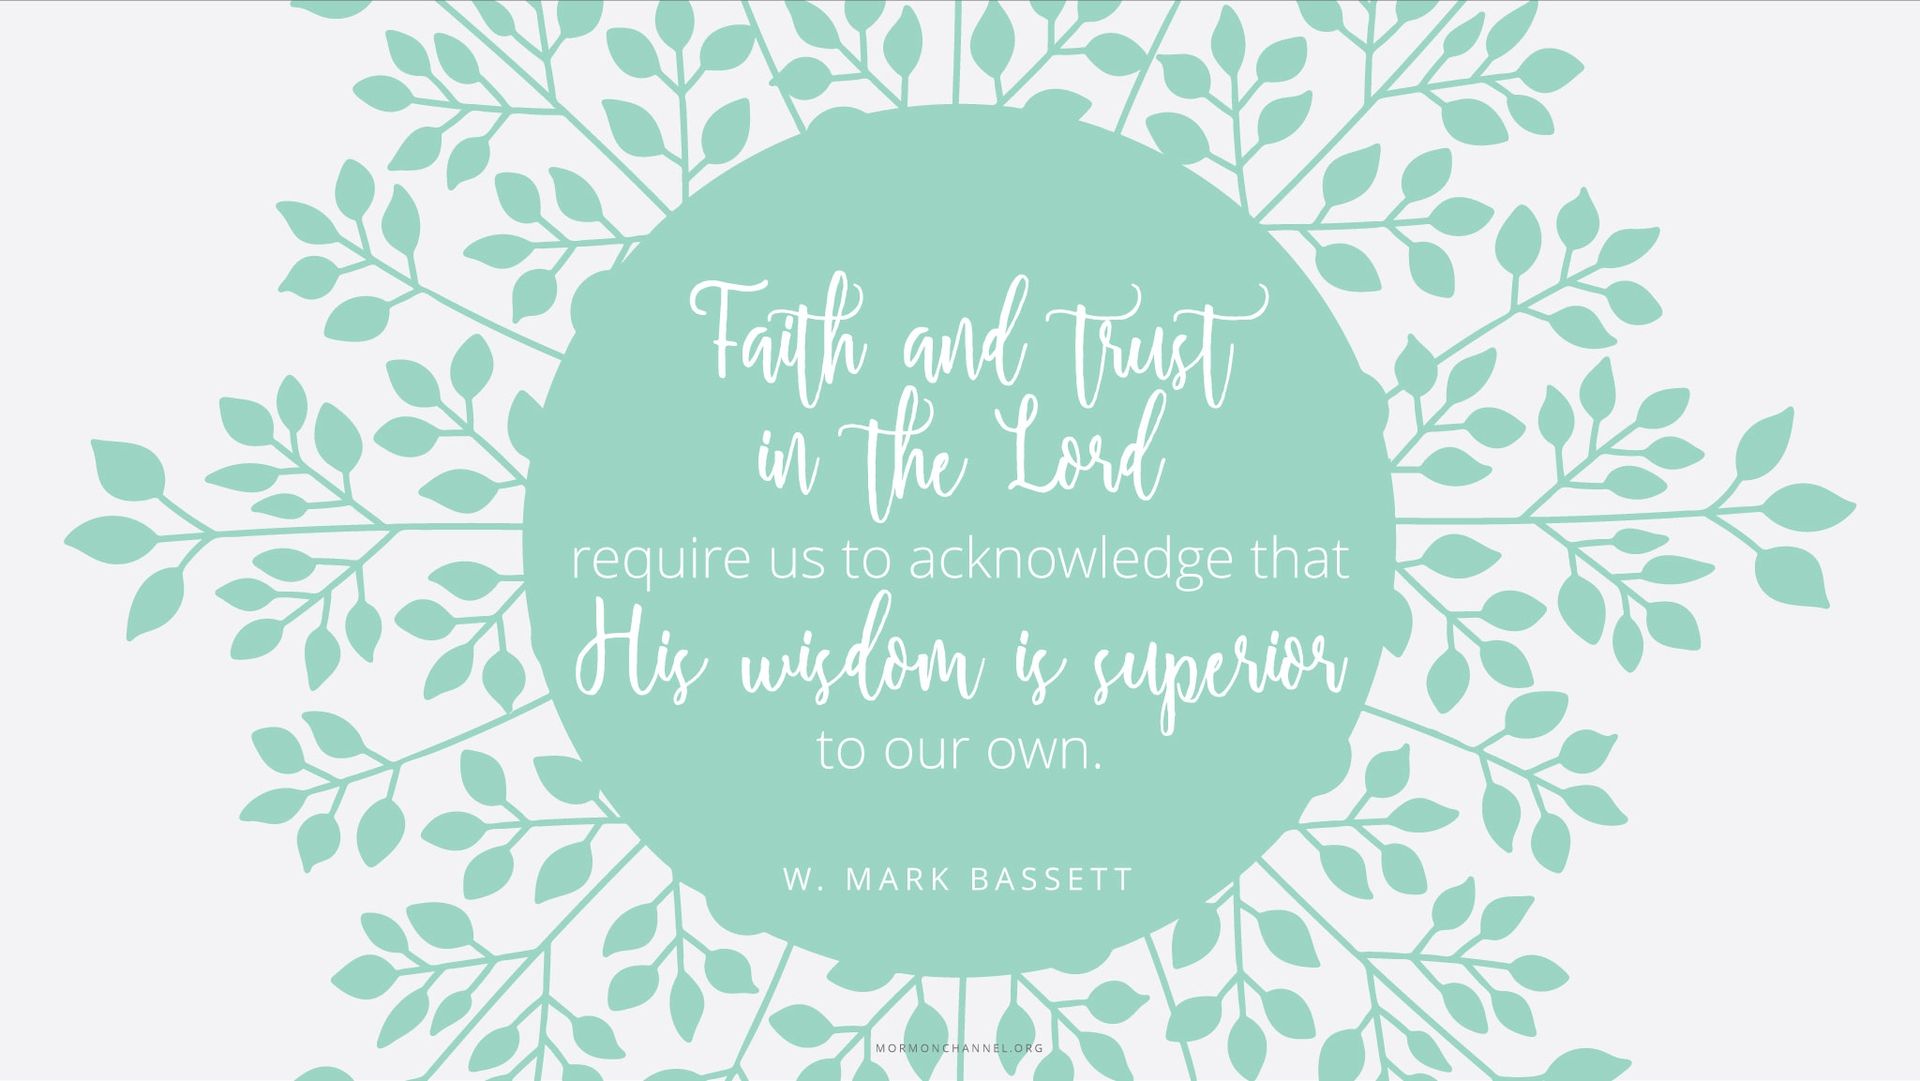 “Faith and trust in the Lord require us to acknowledge that His wisdom is superior to our own.”—Elder W. Mark Bassett, “For Our Spiritual Development and Learning” © undefined ipCode 1.